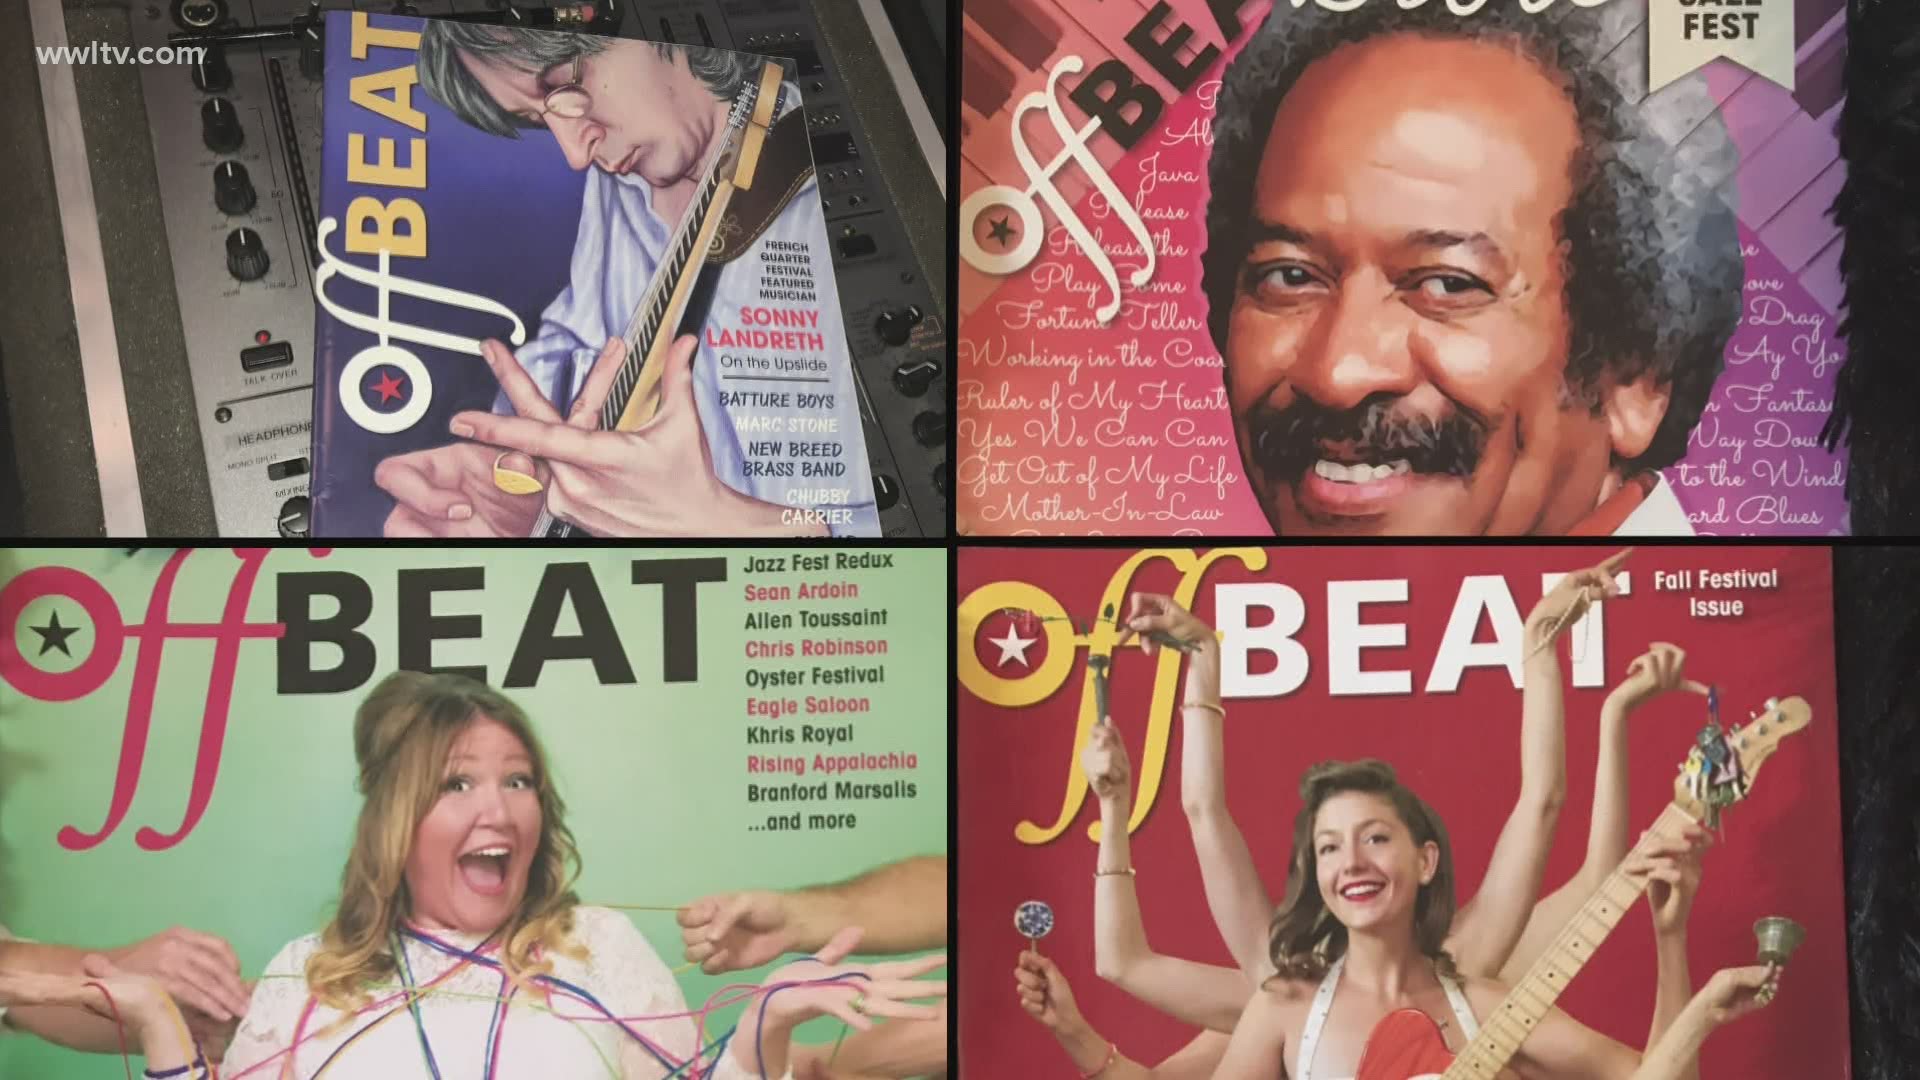 As New Orleans music goes, so goes OffBeat Magazine in the COVID19